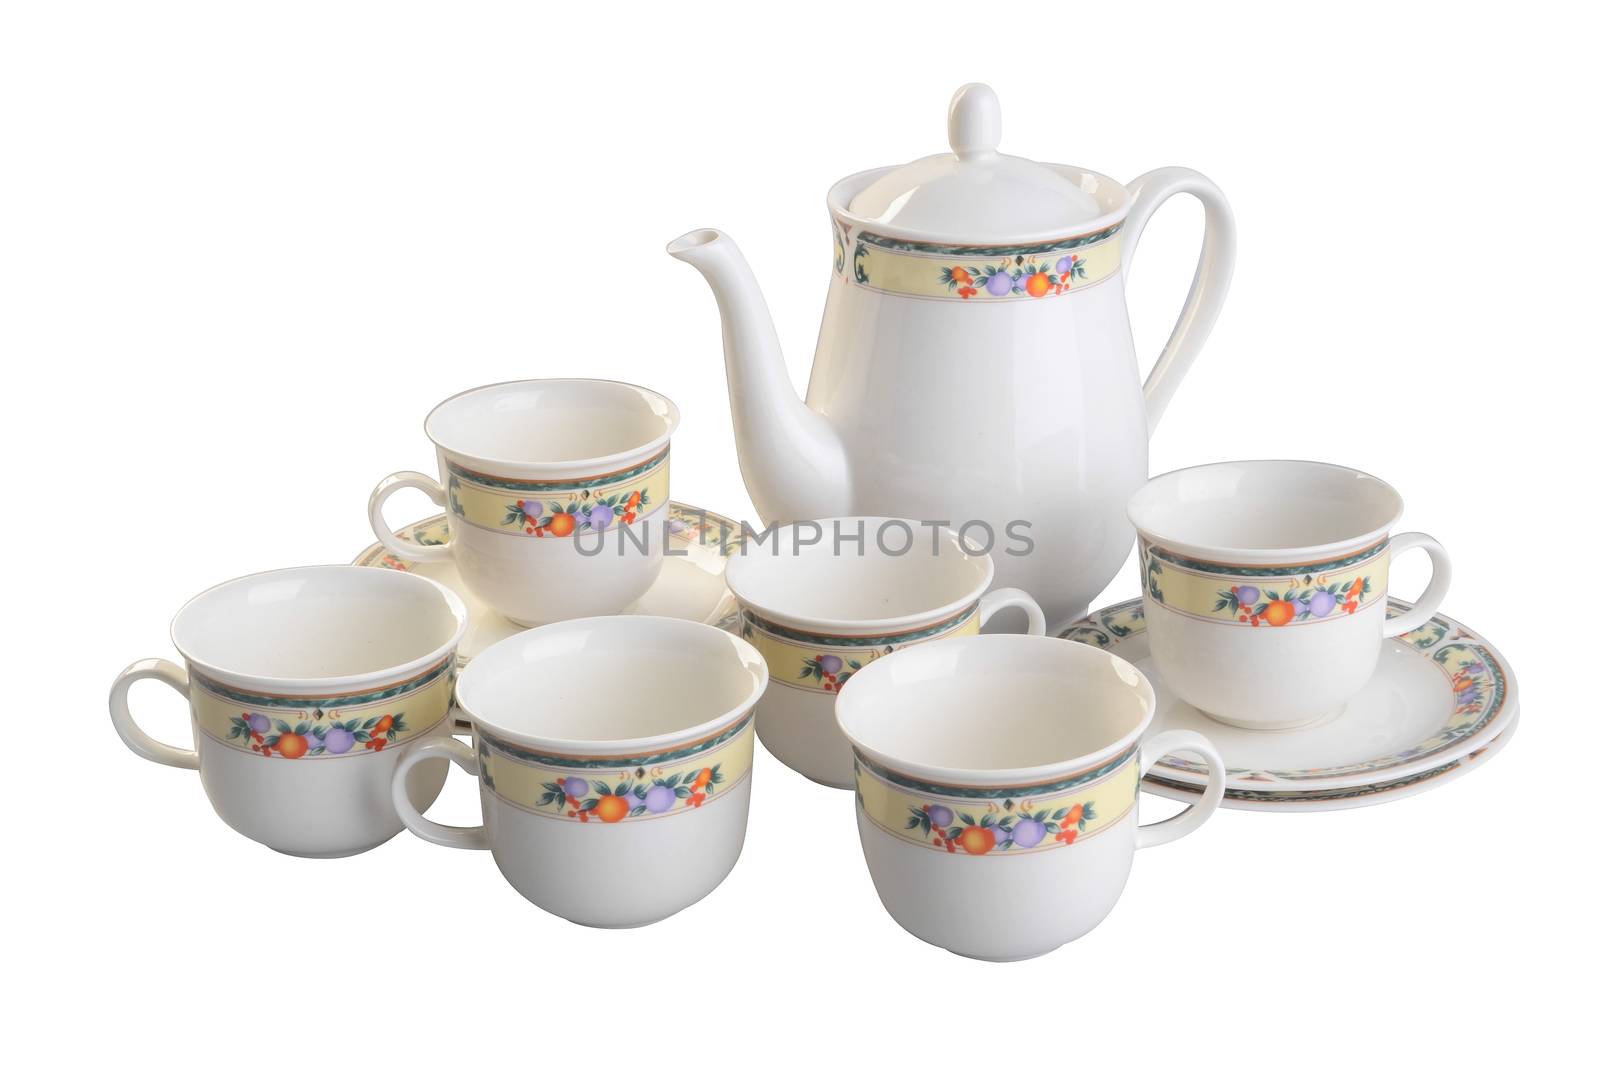 teapot and cup set . teapot and cup set on a background by heinteh